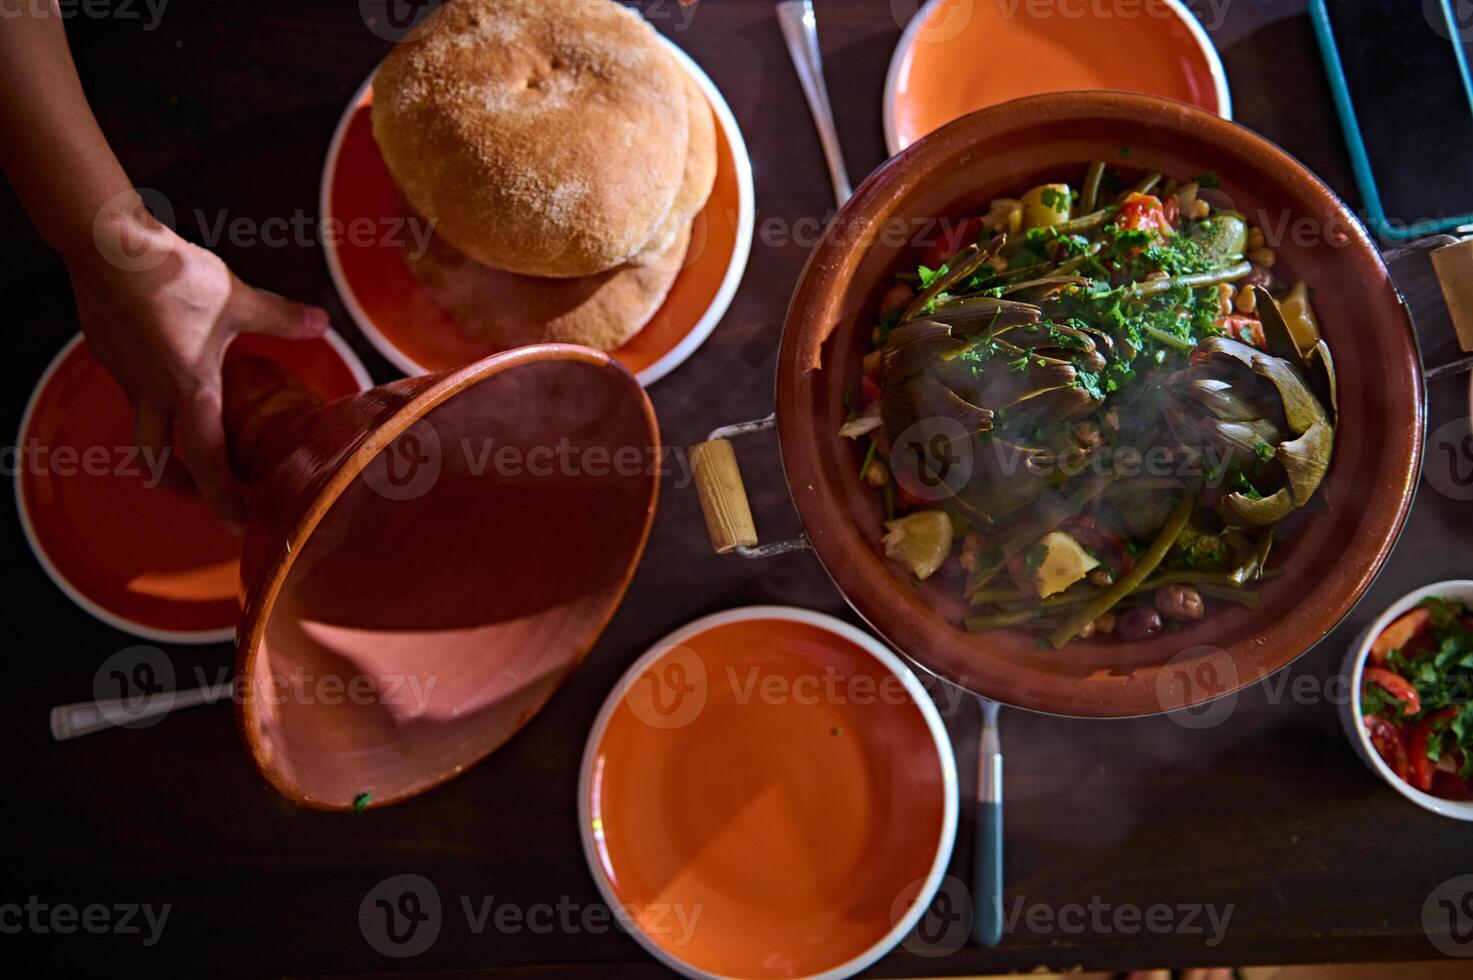 Directly above opening lid of clay crockery, showing a vegetarian meal with organic veggies steamed in tagine with steam photo